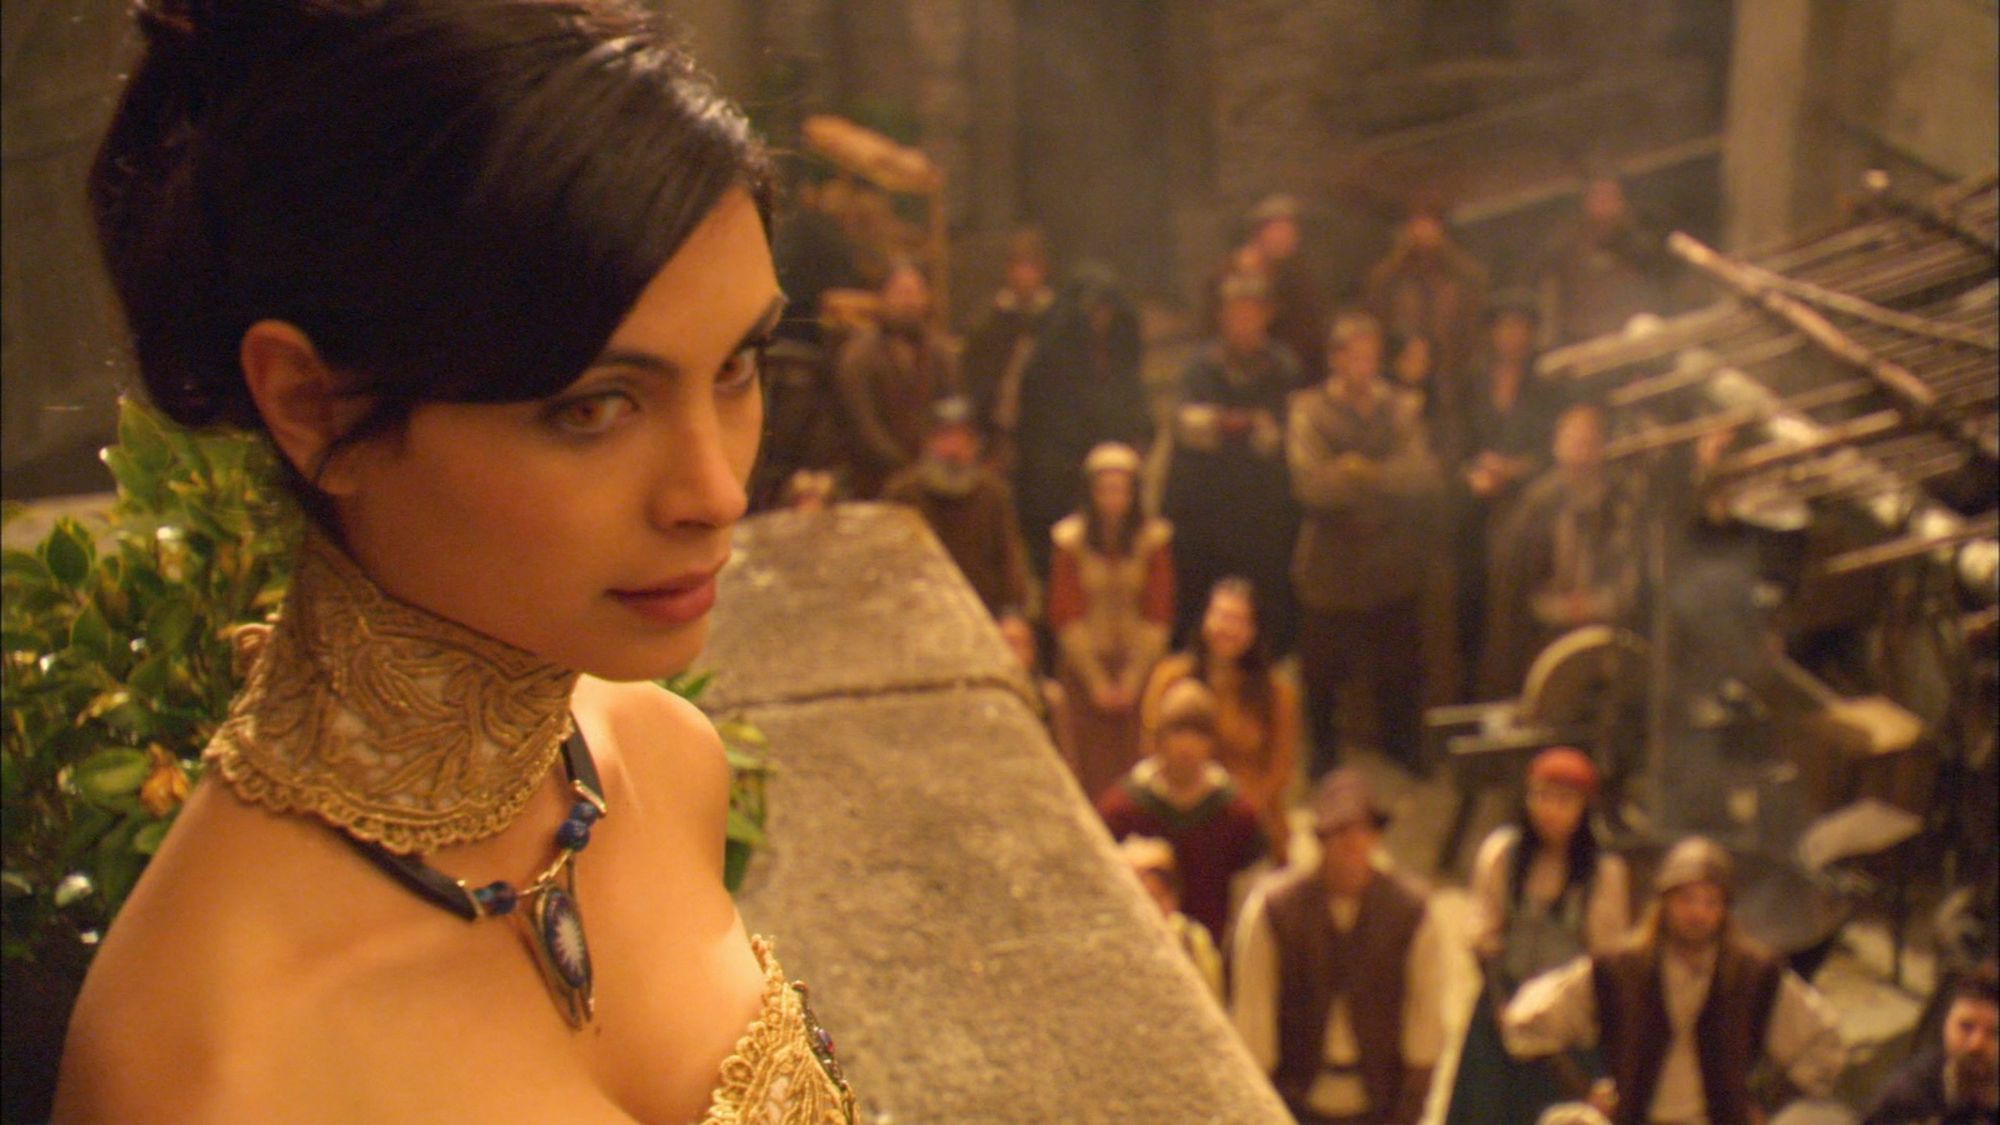 The adult Adria (‎Morena Baccarin) looks out over the crowd.